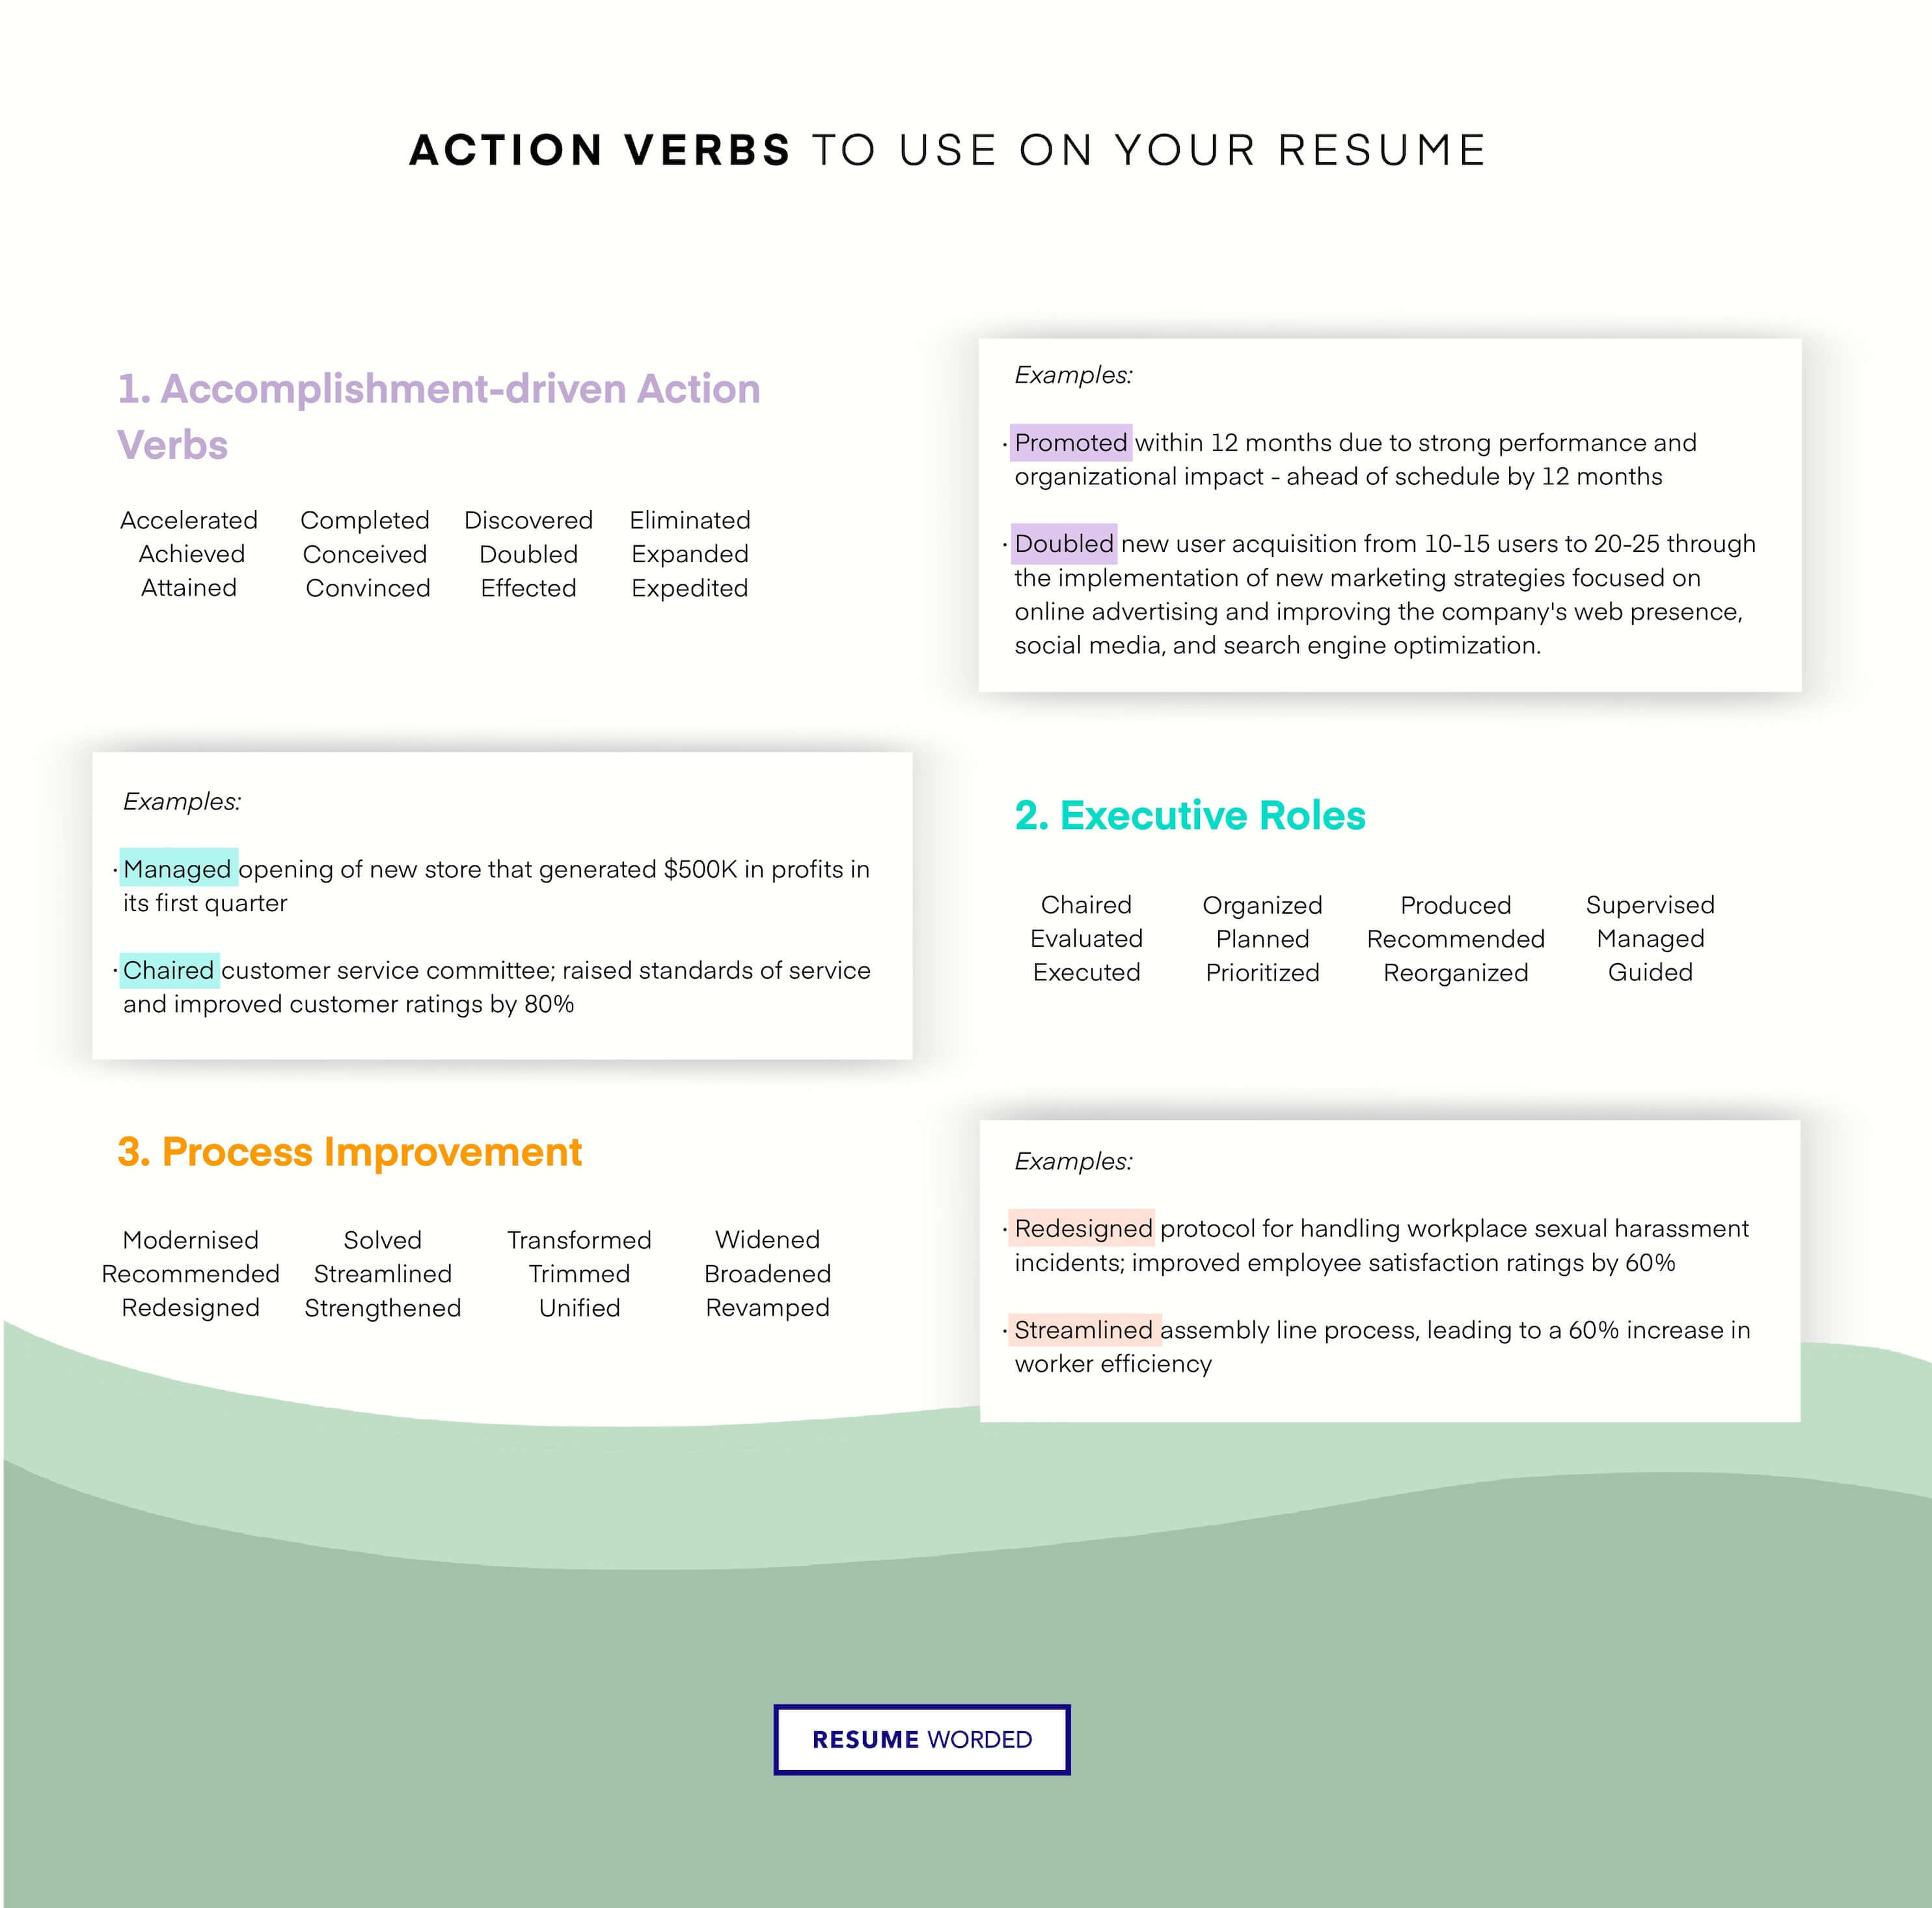 Action verbs to use on your resume